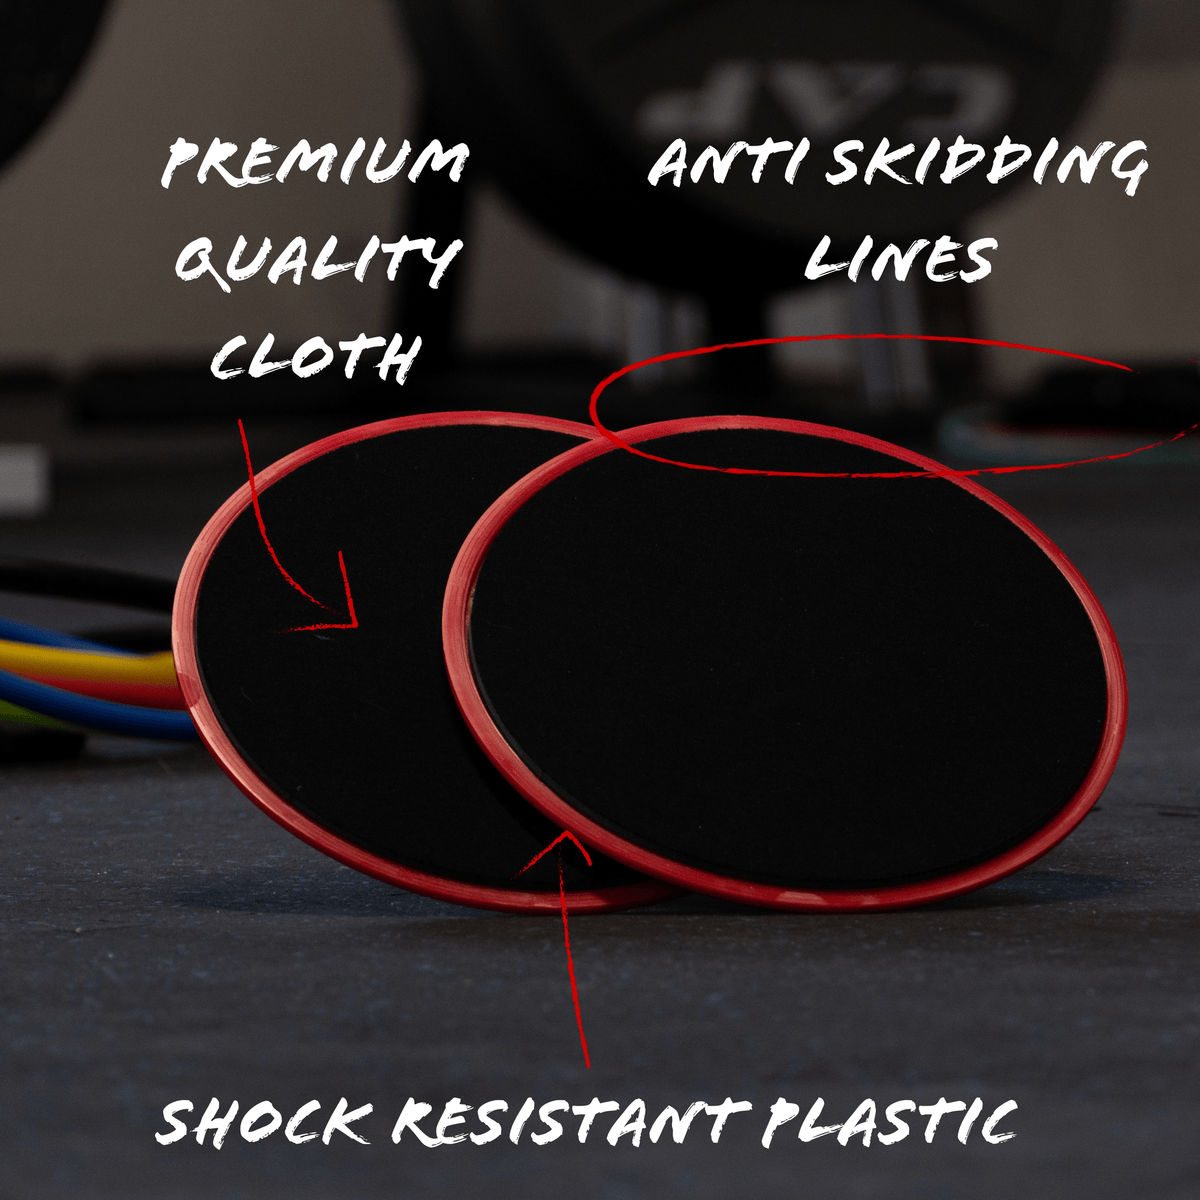 Spartan Core Sliding Discs are made with premium quality cloth, anti skidding lines, and shock resistant plastic. 